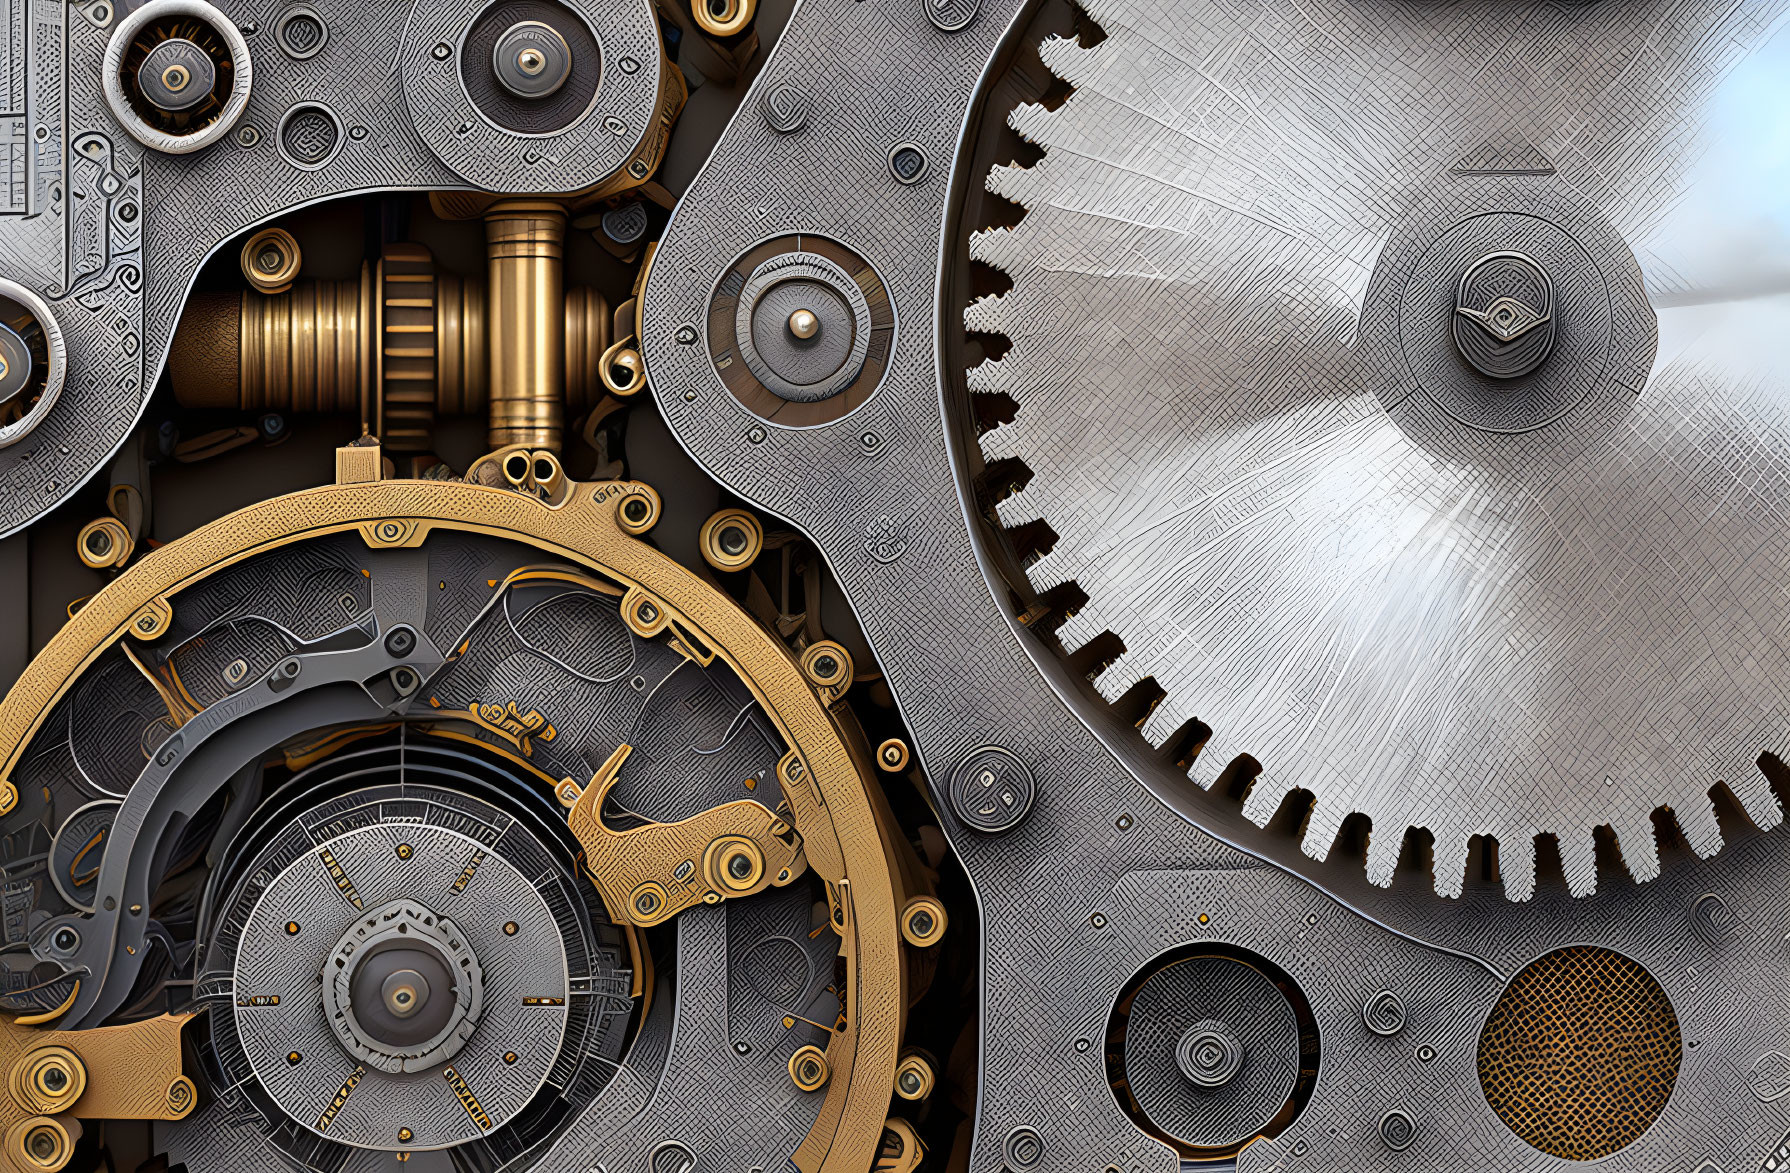 Detailed view of metallic gears and cogs showcasing intricate textures.